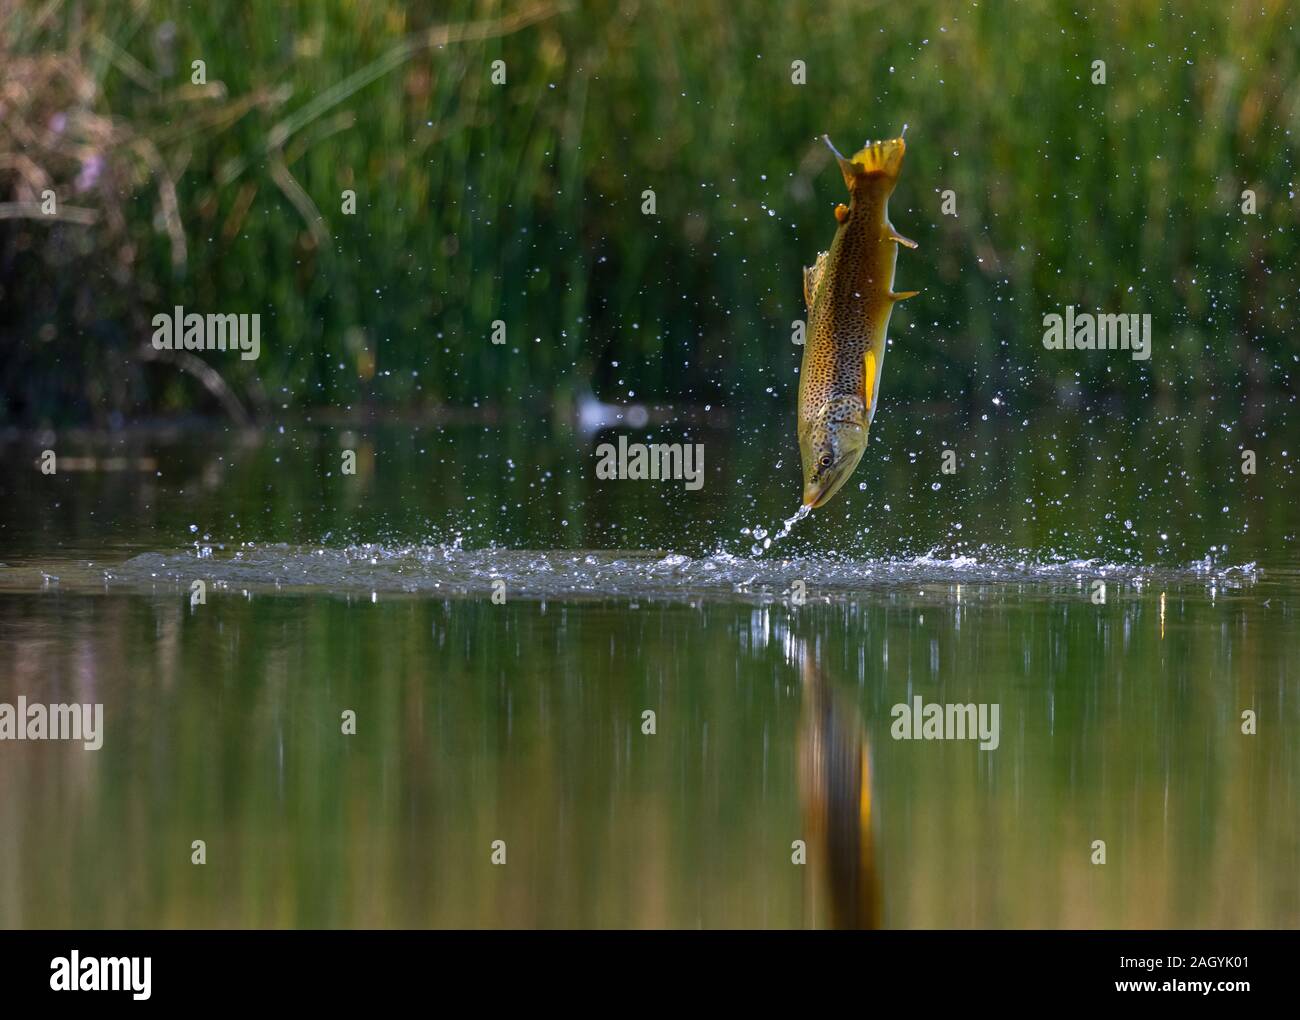 Brown trout, Salmo trutta, leaping out of the water as they try to feed on egg-laying dragonflies and damselflies at Marfield Nature Reserve, Masham. Stock Photo